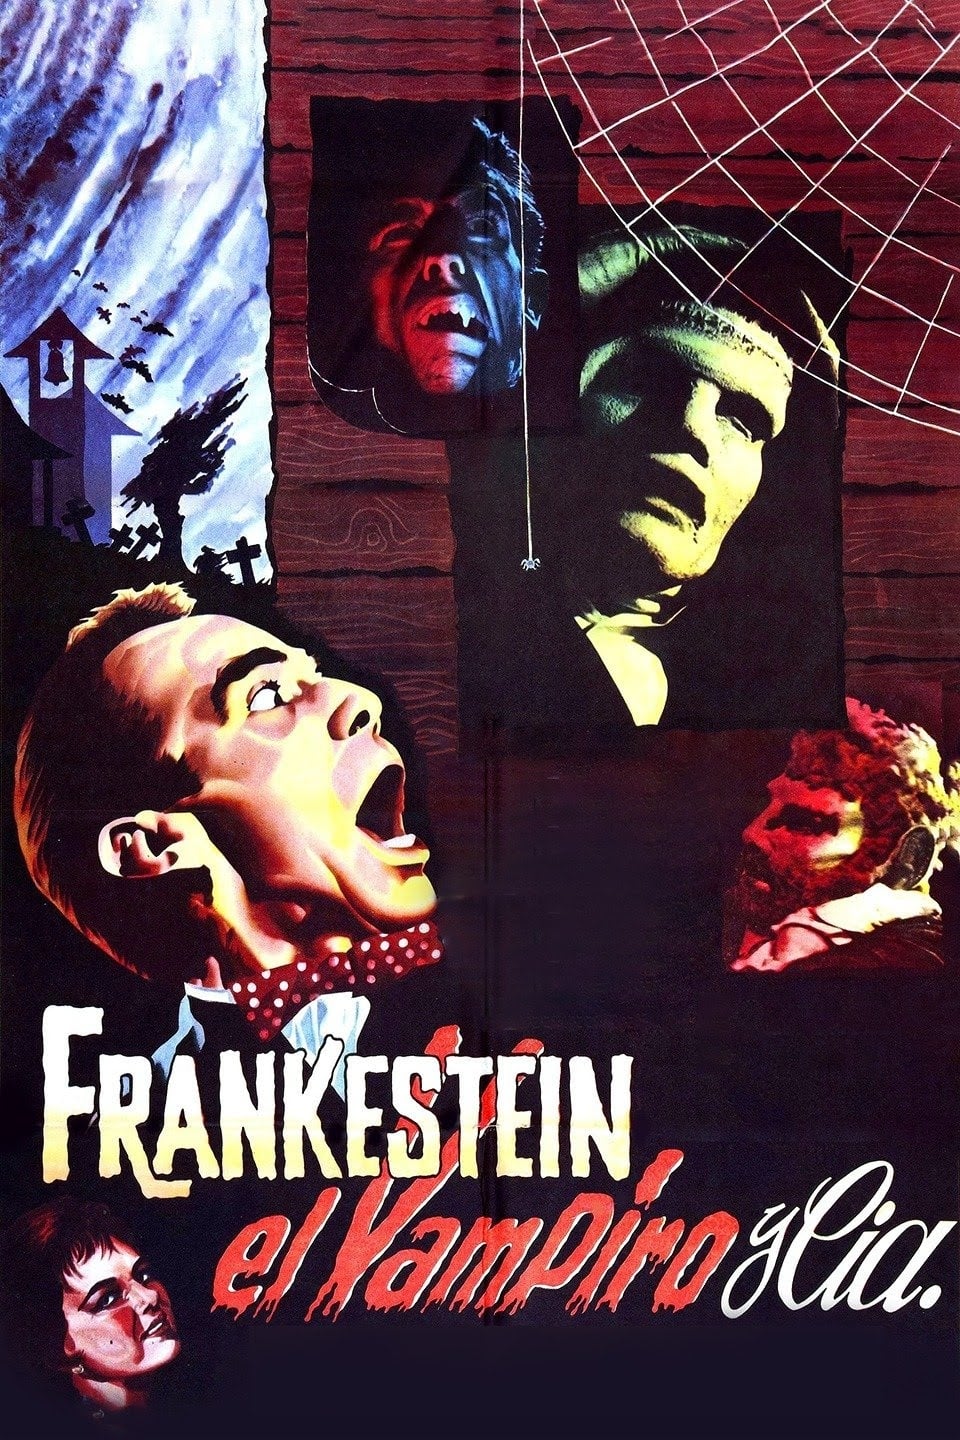 Frankenstein, the Vampire and Company